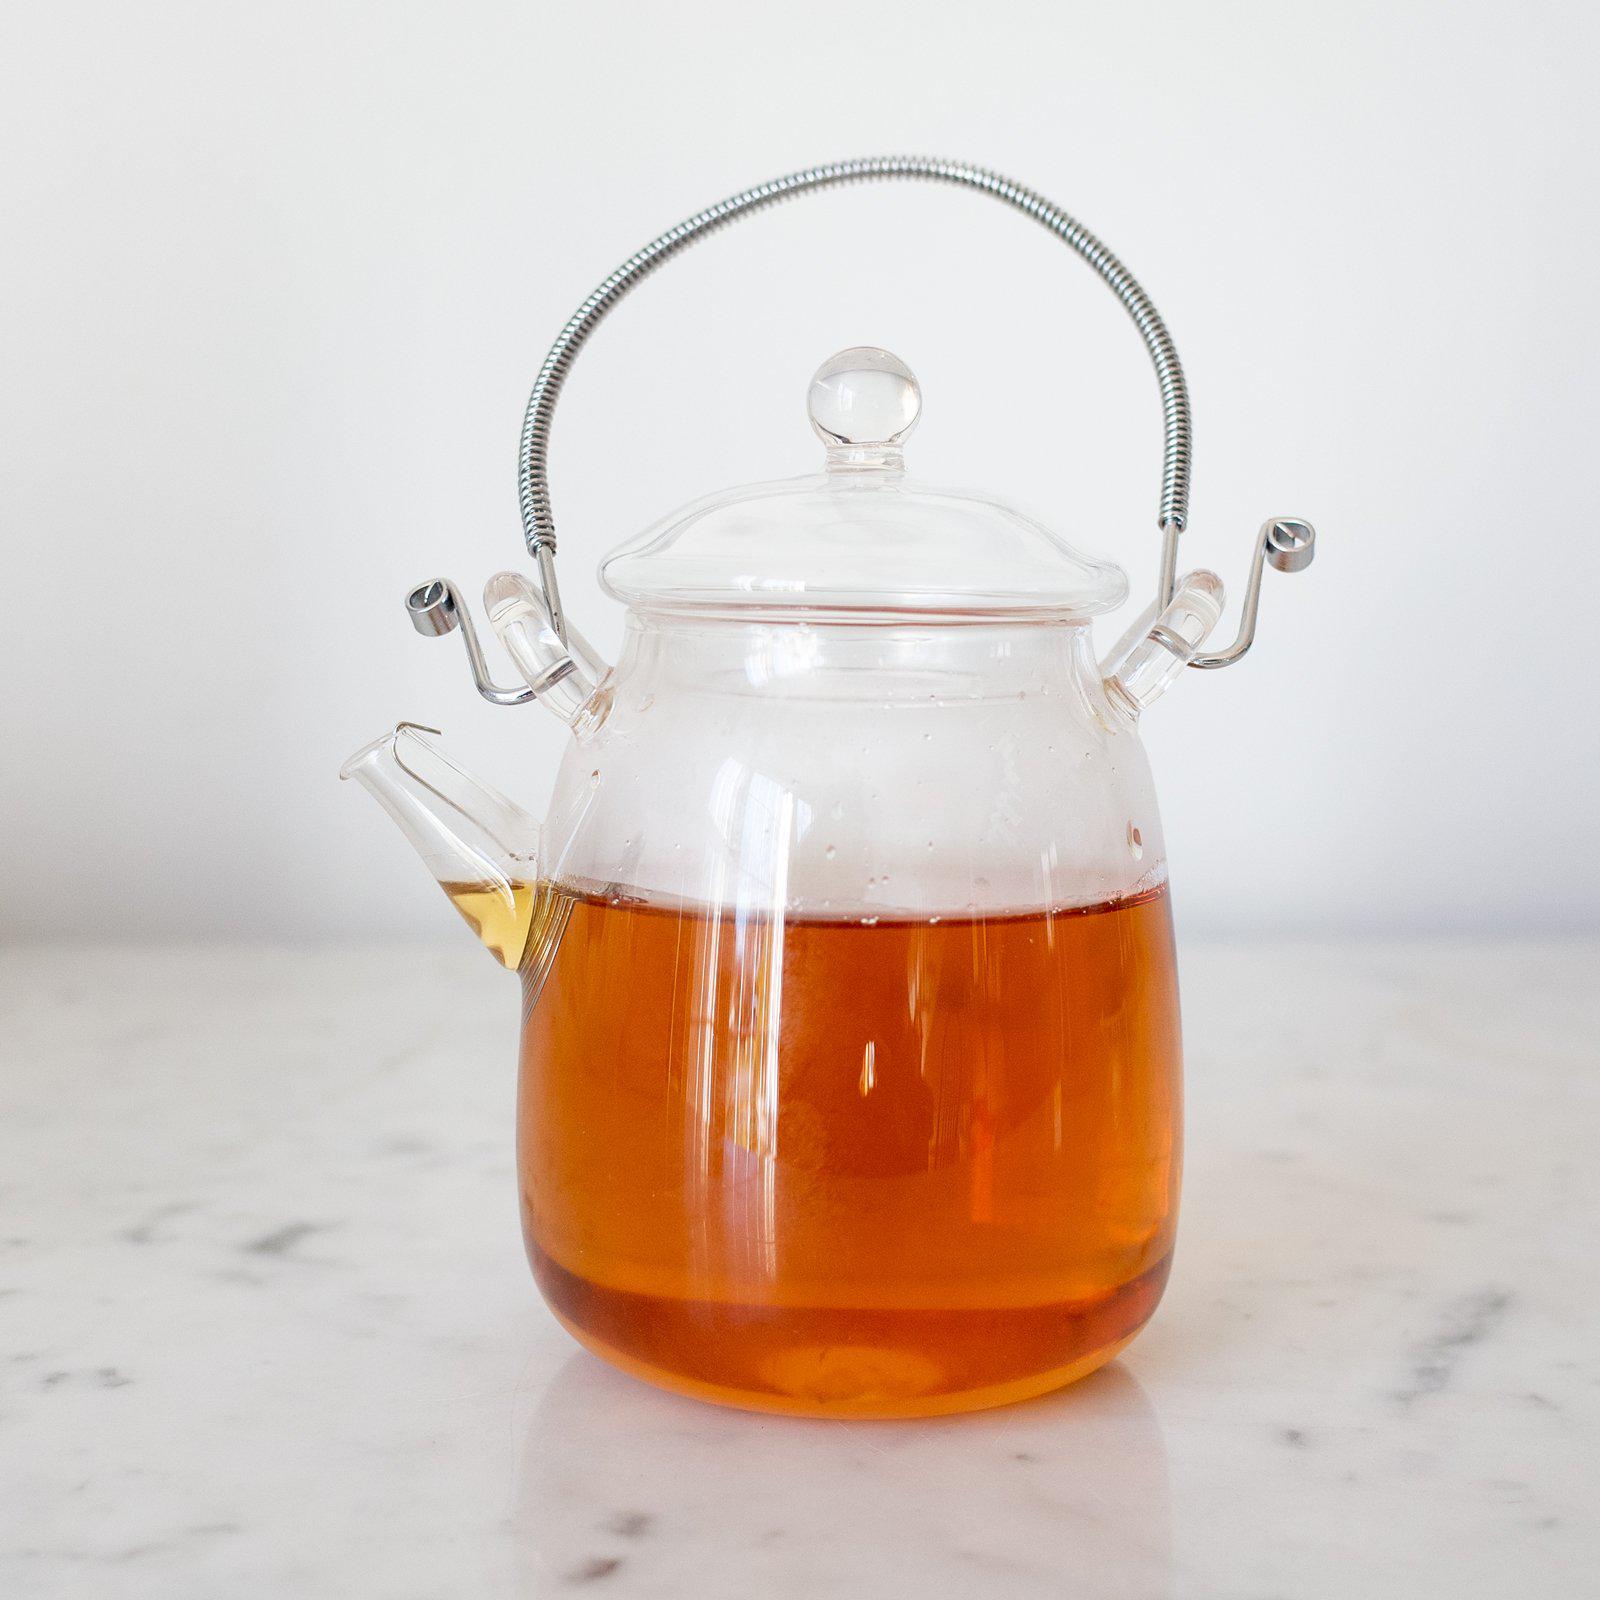 20 Best Teapots And Kettles To Brew The Perfect Cup